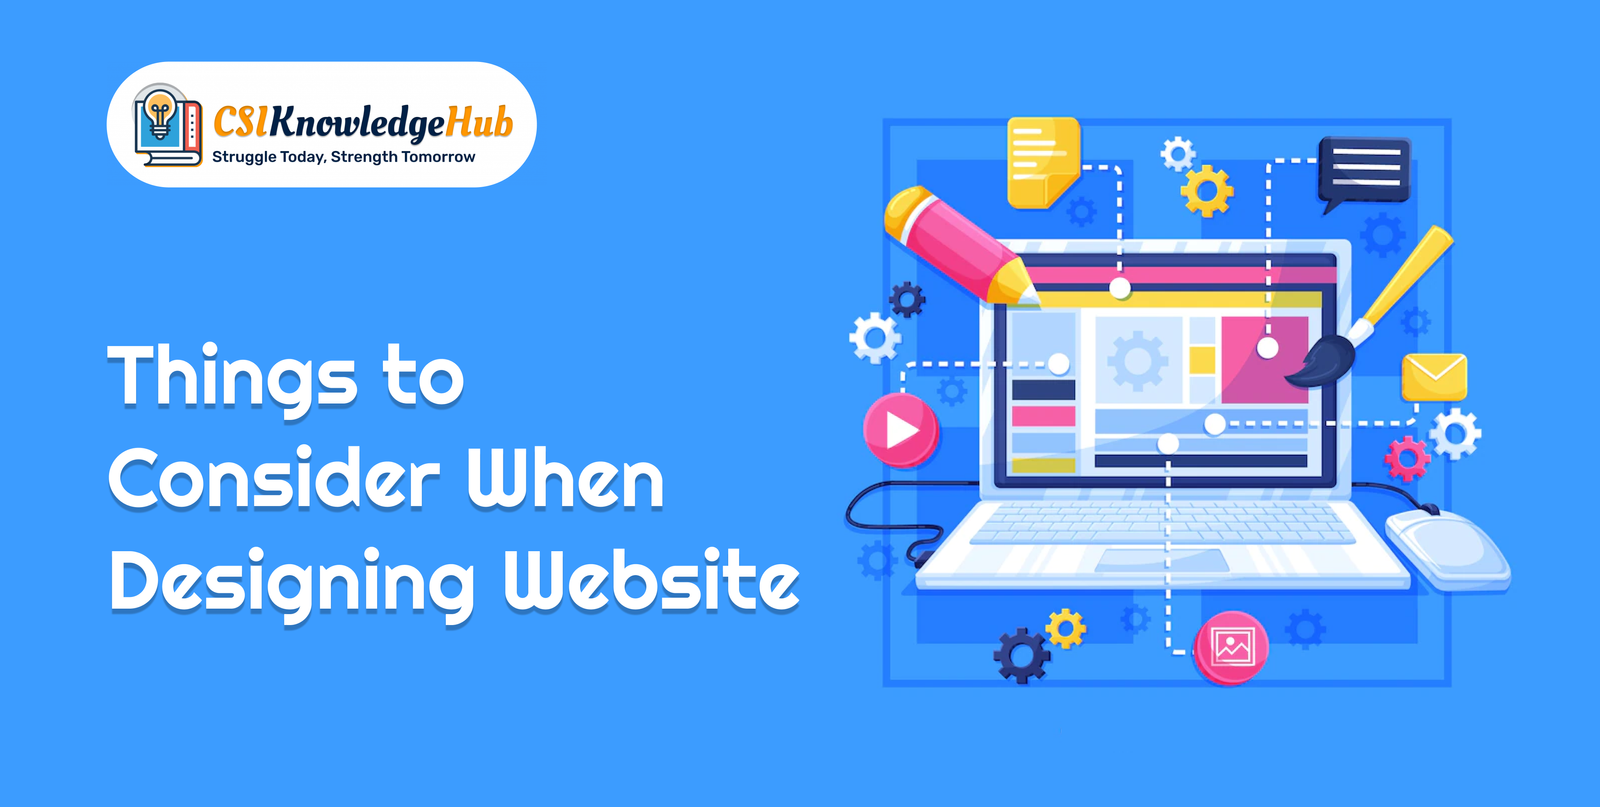 Things to Consider When Designing Website